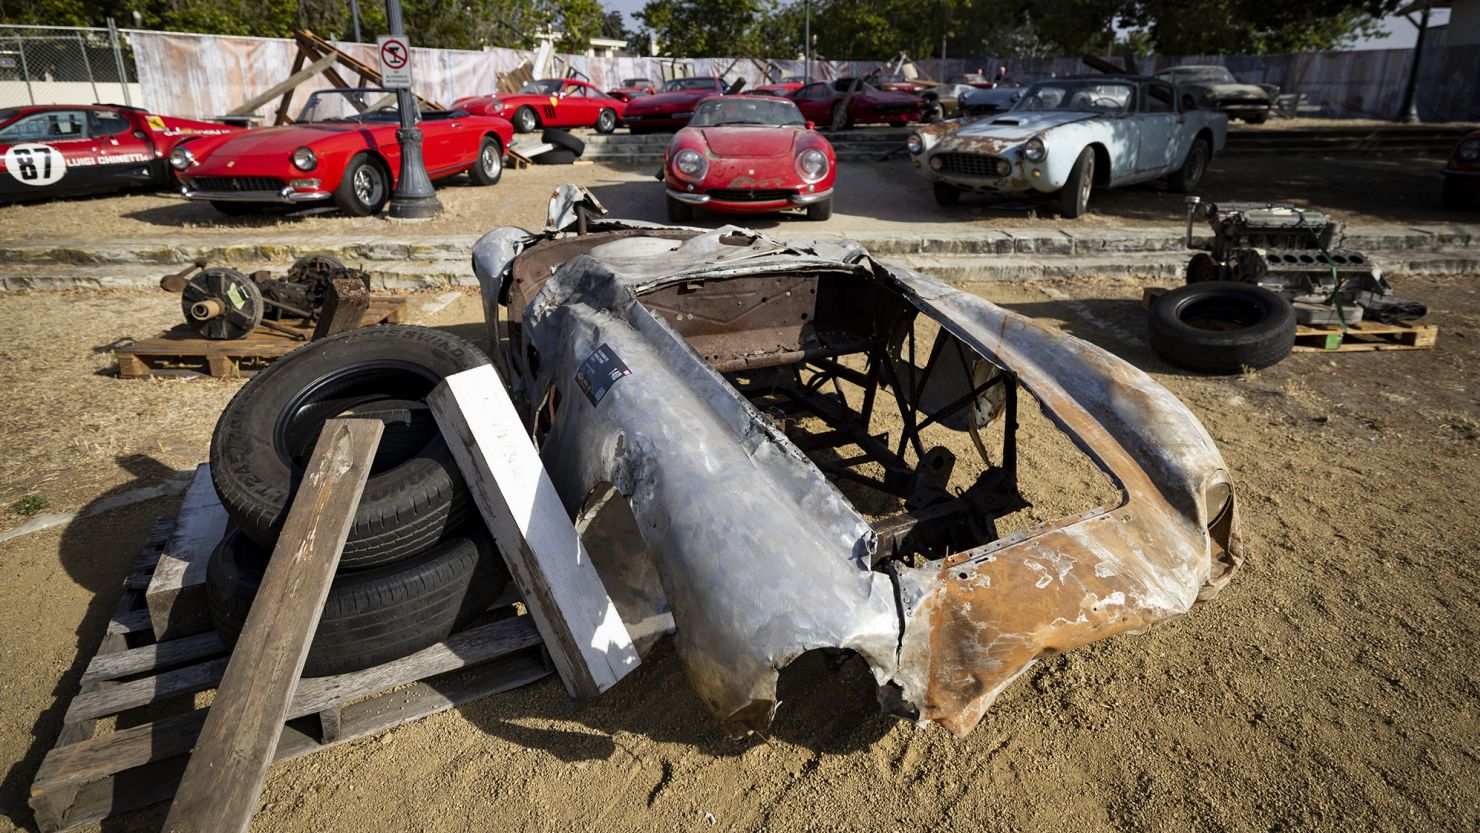 The 1945 Ferrari 500 Mondial Spider exhibited in a faux junkyard setting ahead of RM Sotheby's Monterey auction..